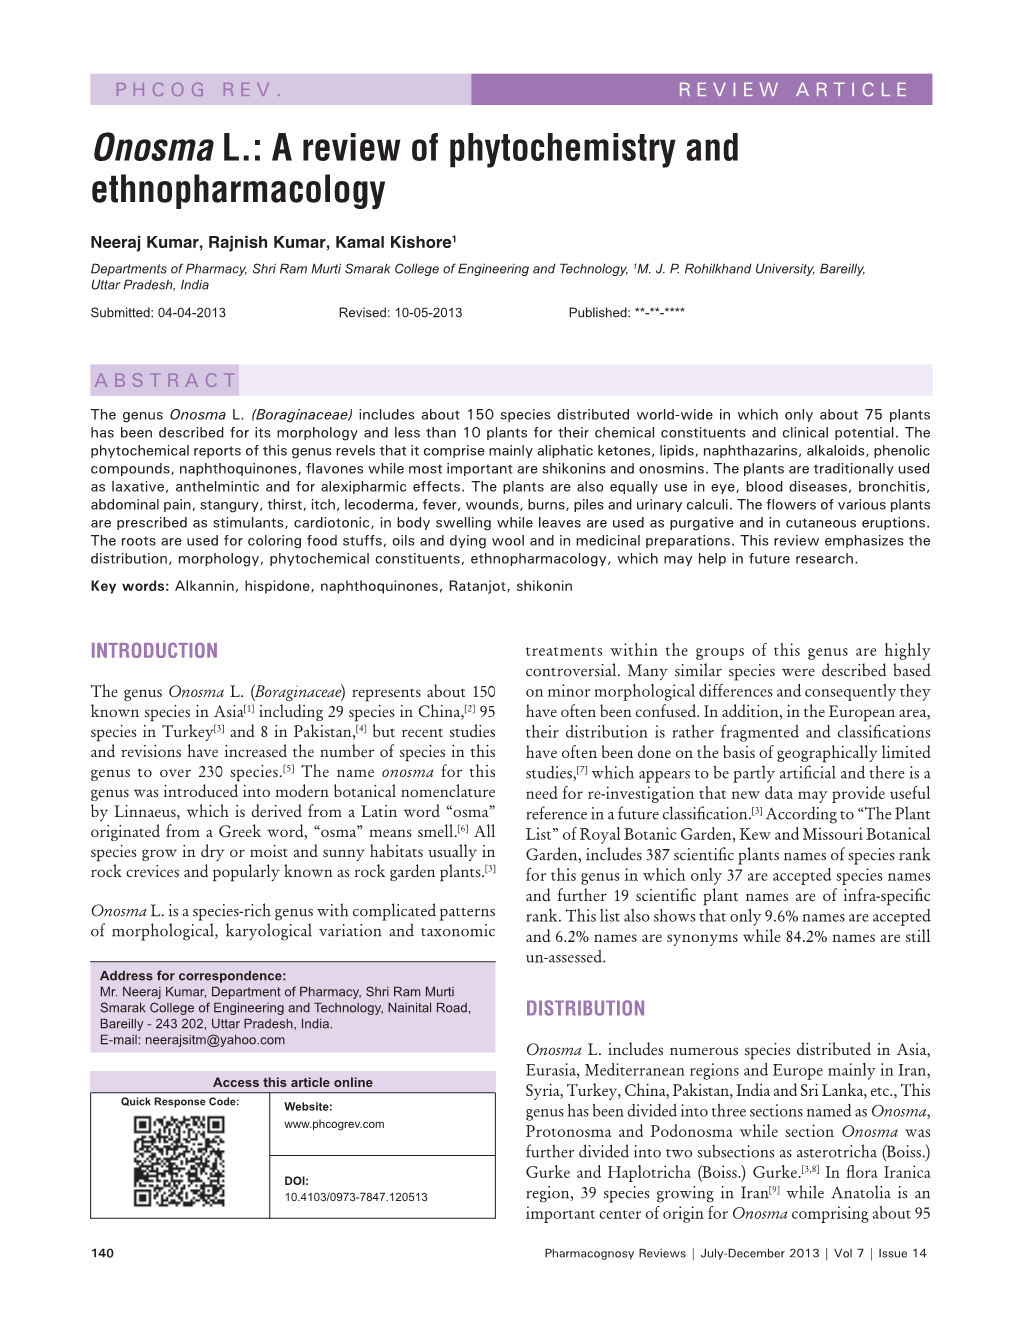 Onosma L.: a Review of Phytochemistry and Ethnopharmacology